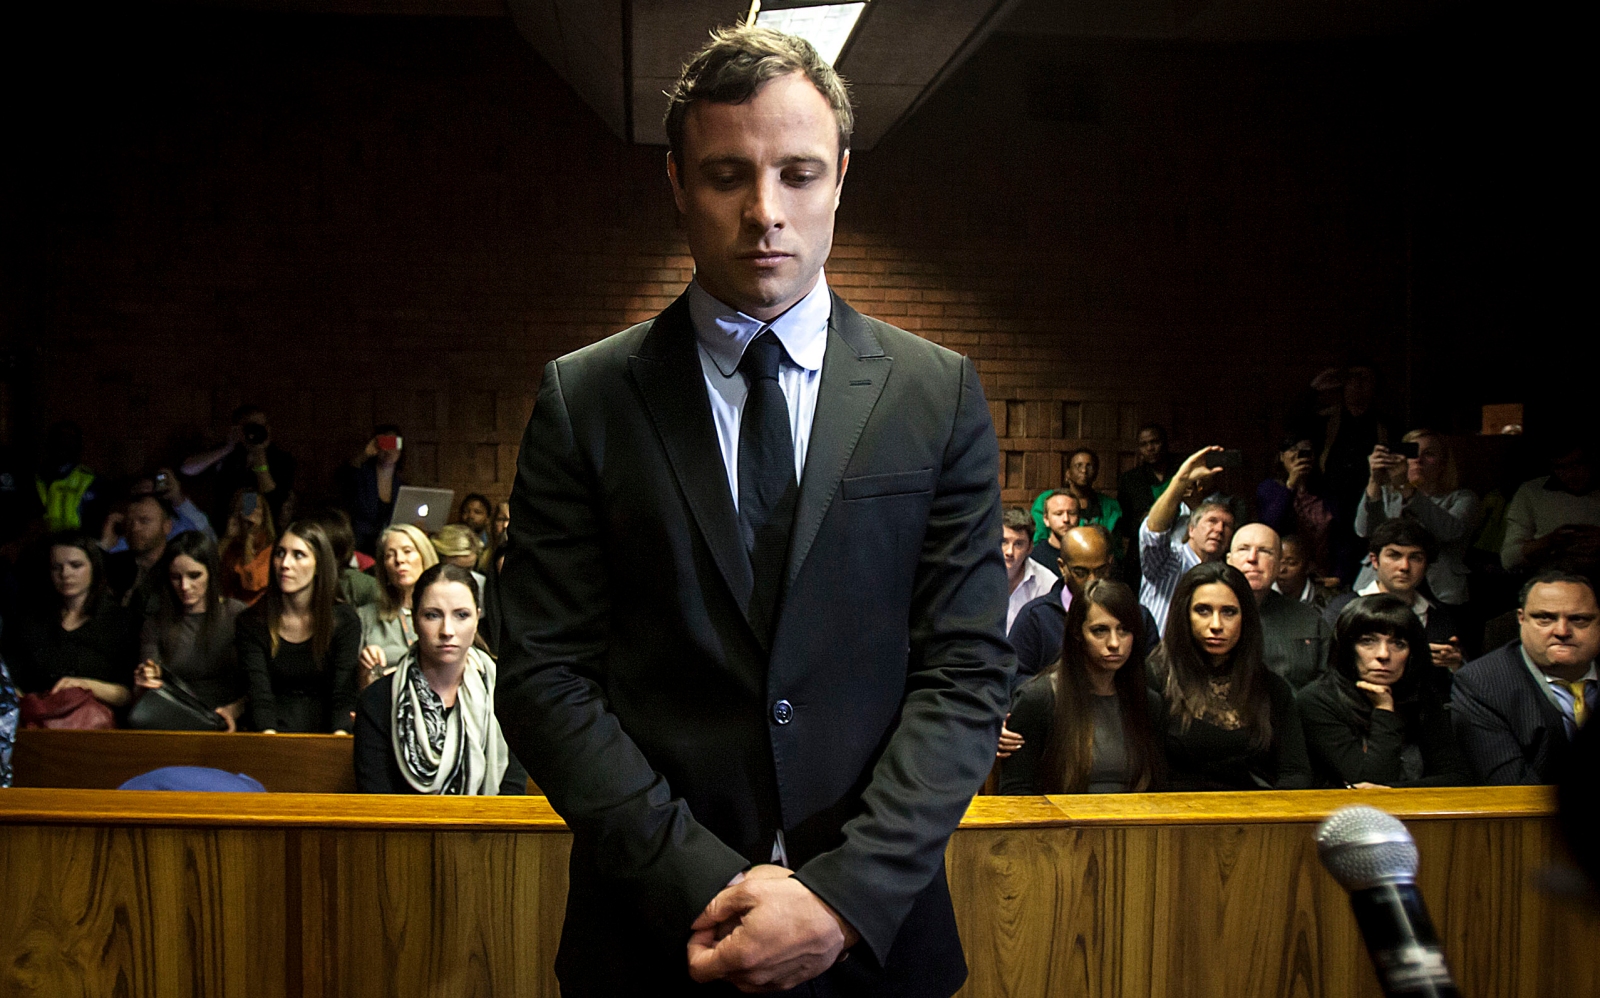 What does the future hold for convicted murderer Oscar Pistorius after talk of parole eligibility?